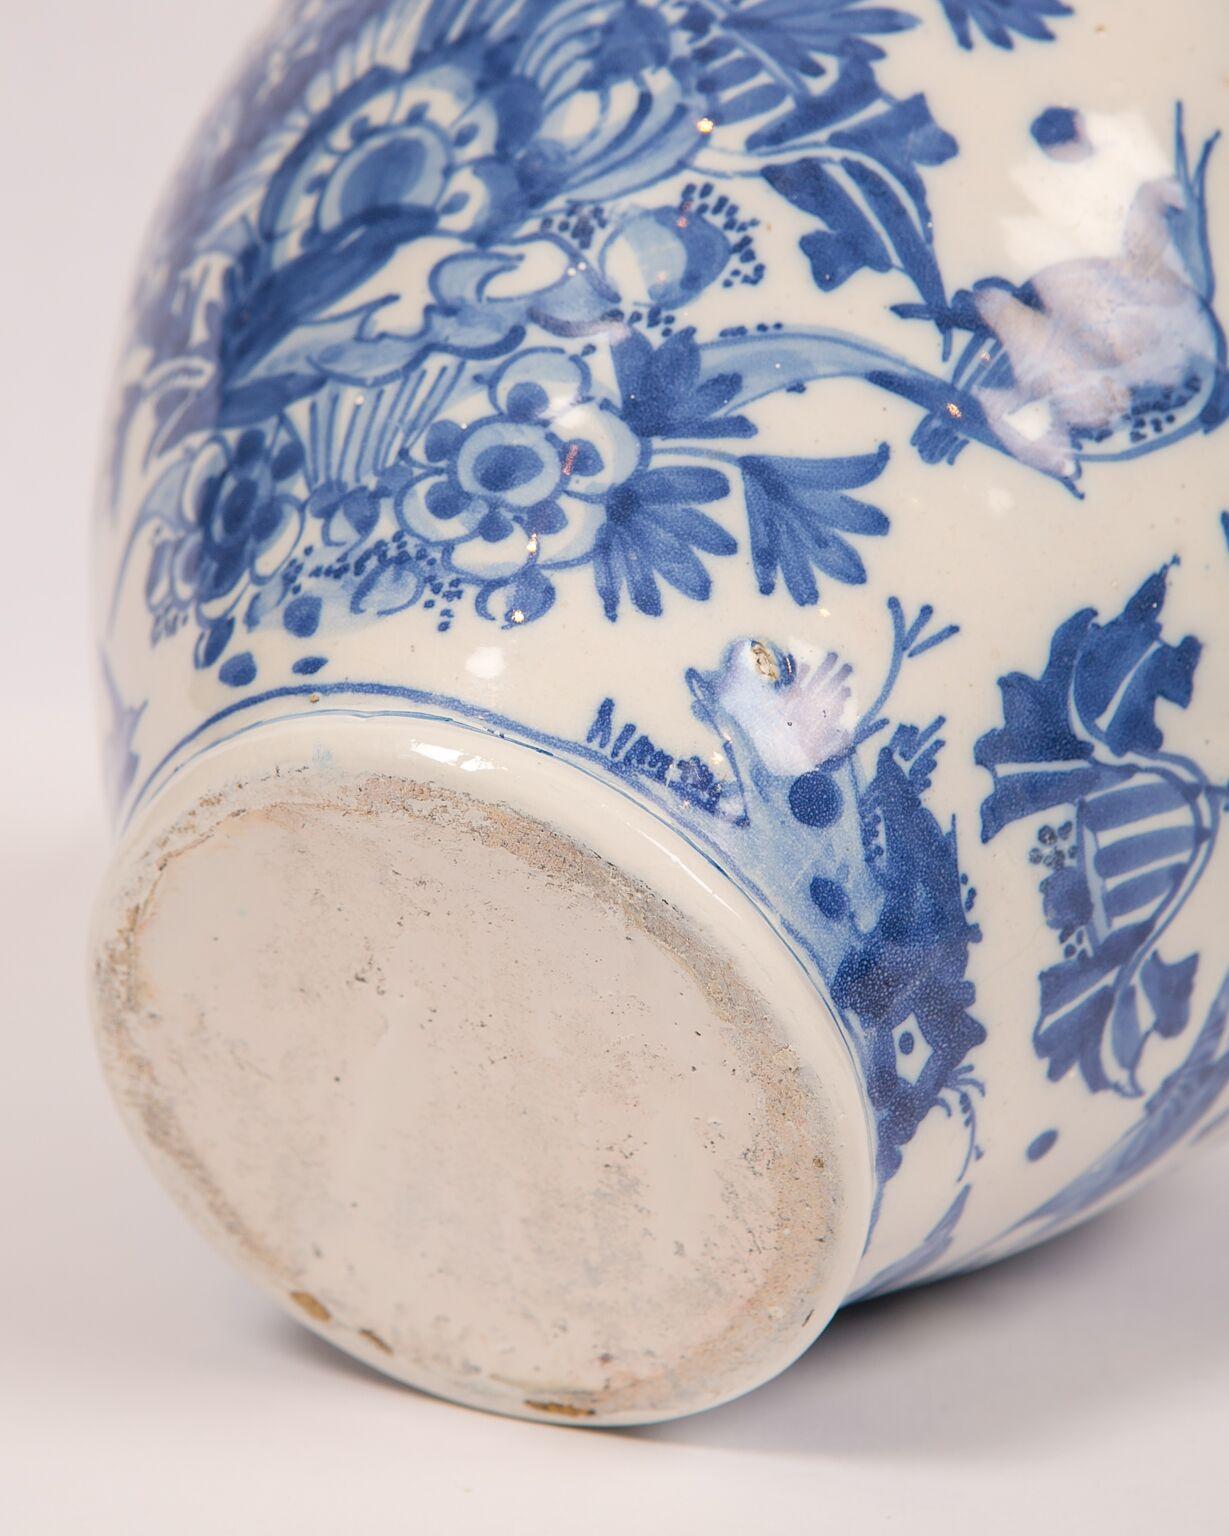 London Delftware Blue and White Flower Vase 17th Century circa 1685 5